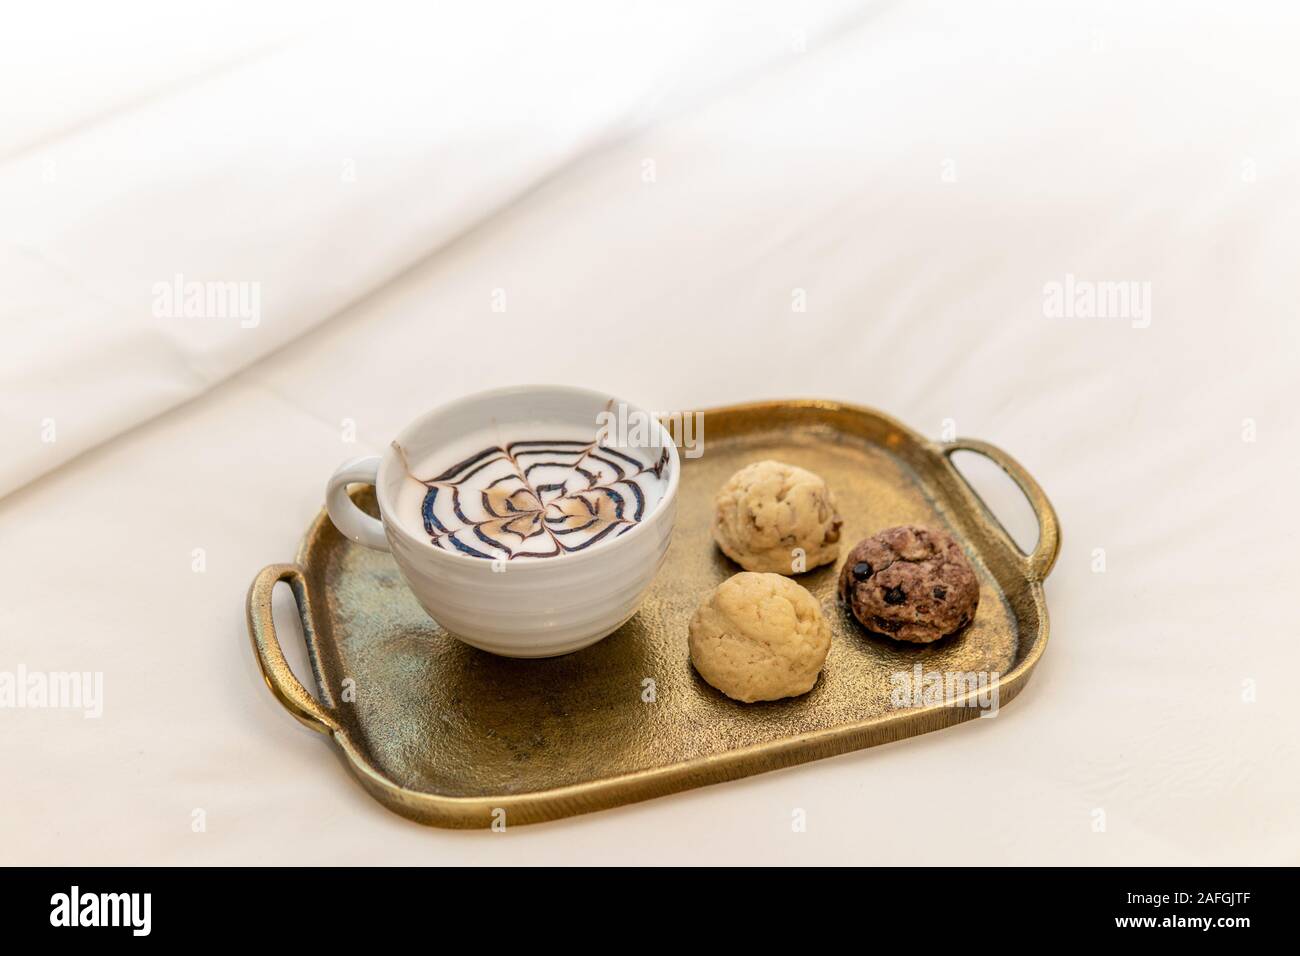 cappuccino with fancy chocolate design on top with three various baked cookies on gold tray in hotel room on bed Stock Photo